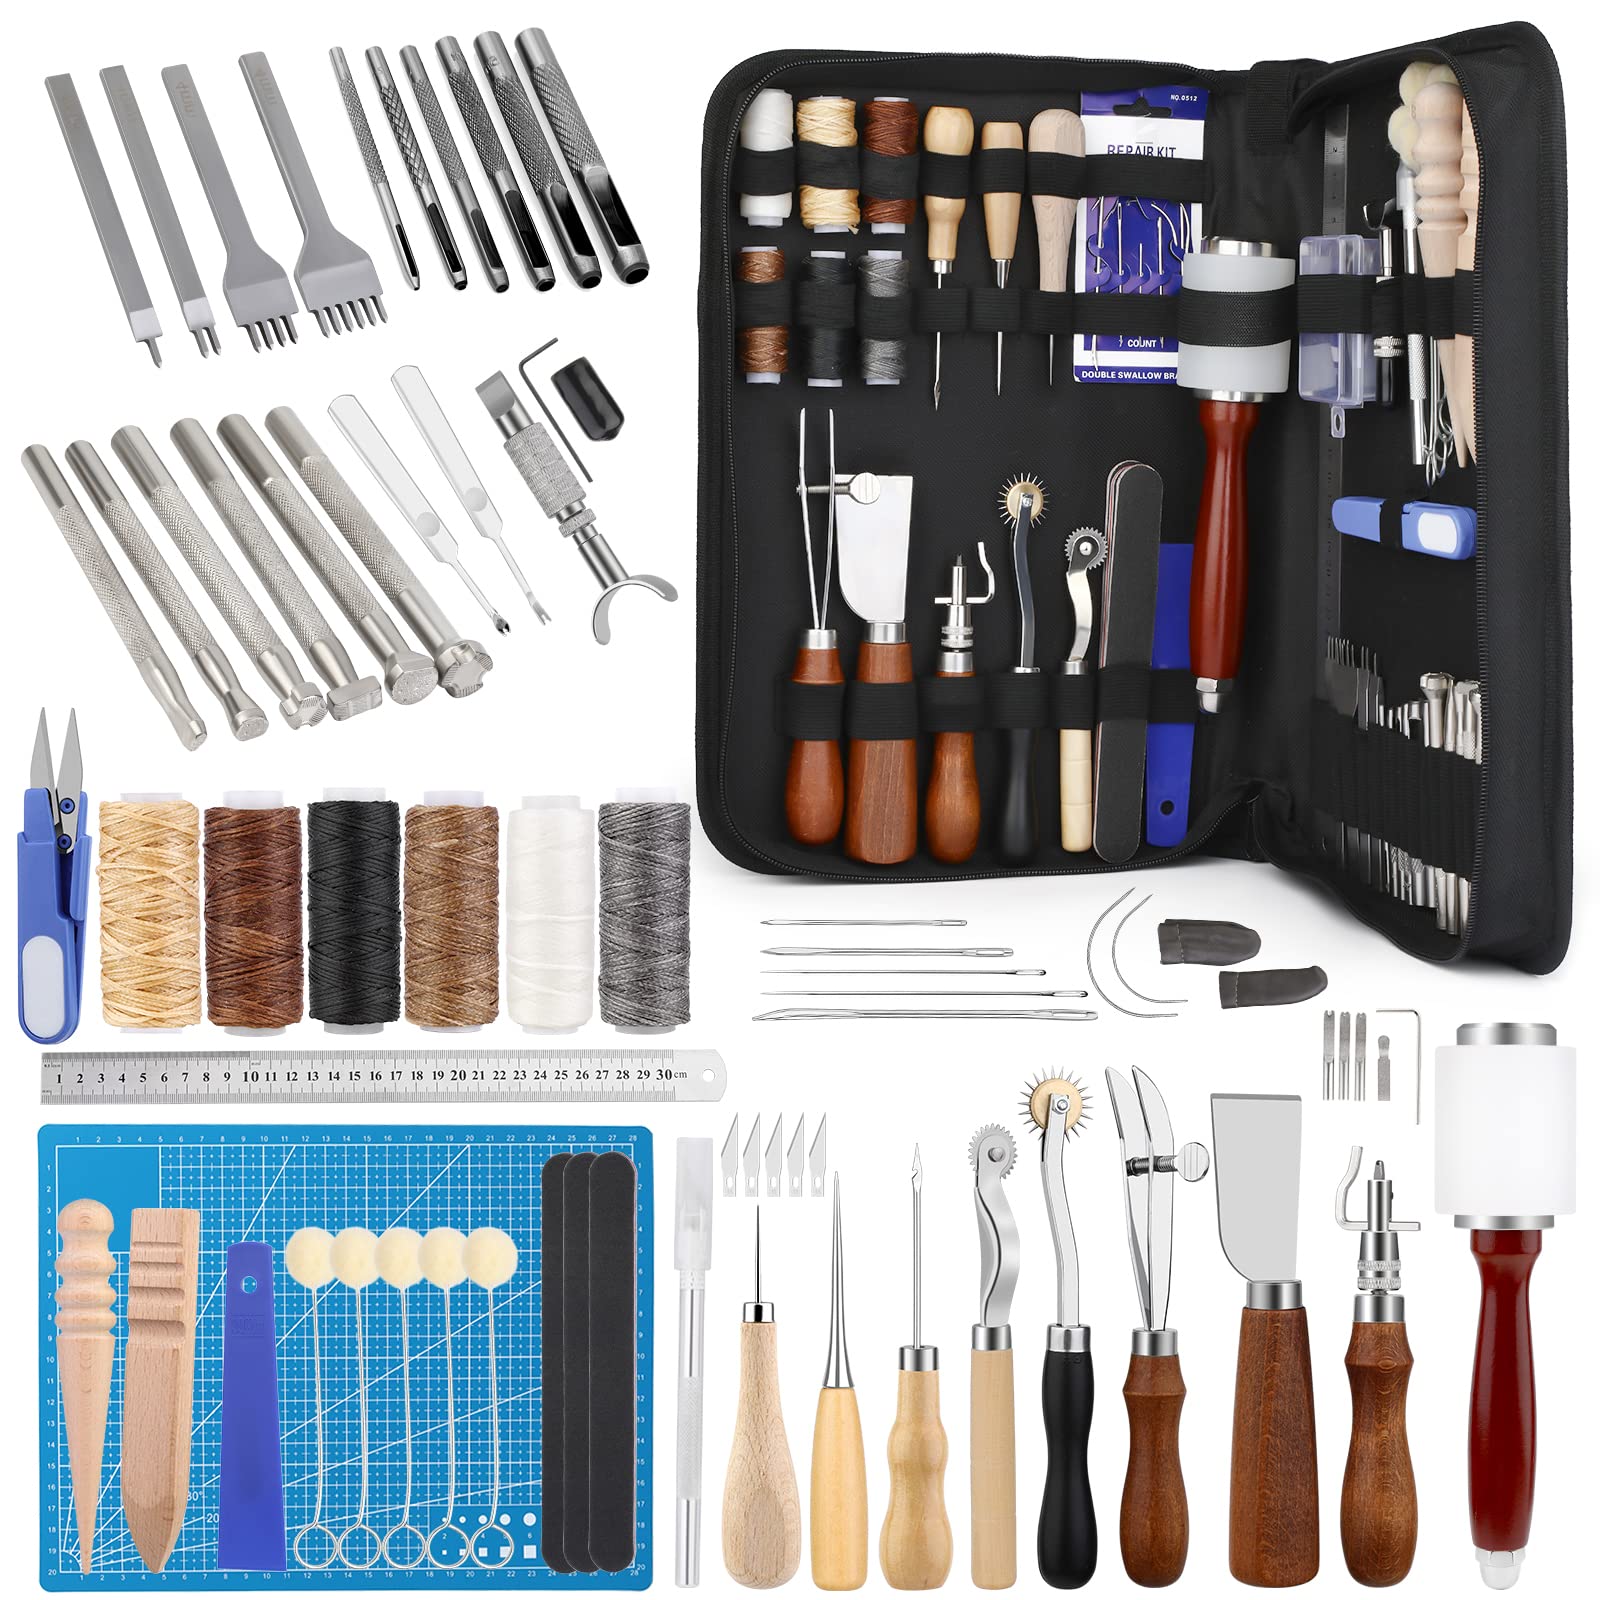 Leather Craft Tools 5 in 1 Pro Leathercraft Edge Press Kit Leather Tools  Leather Working Tools for Leather Tools Kit Leather Making Tools 